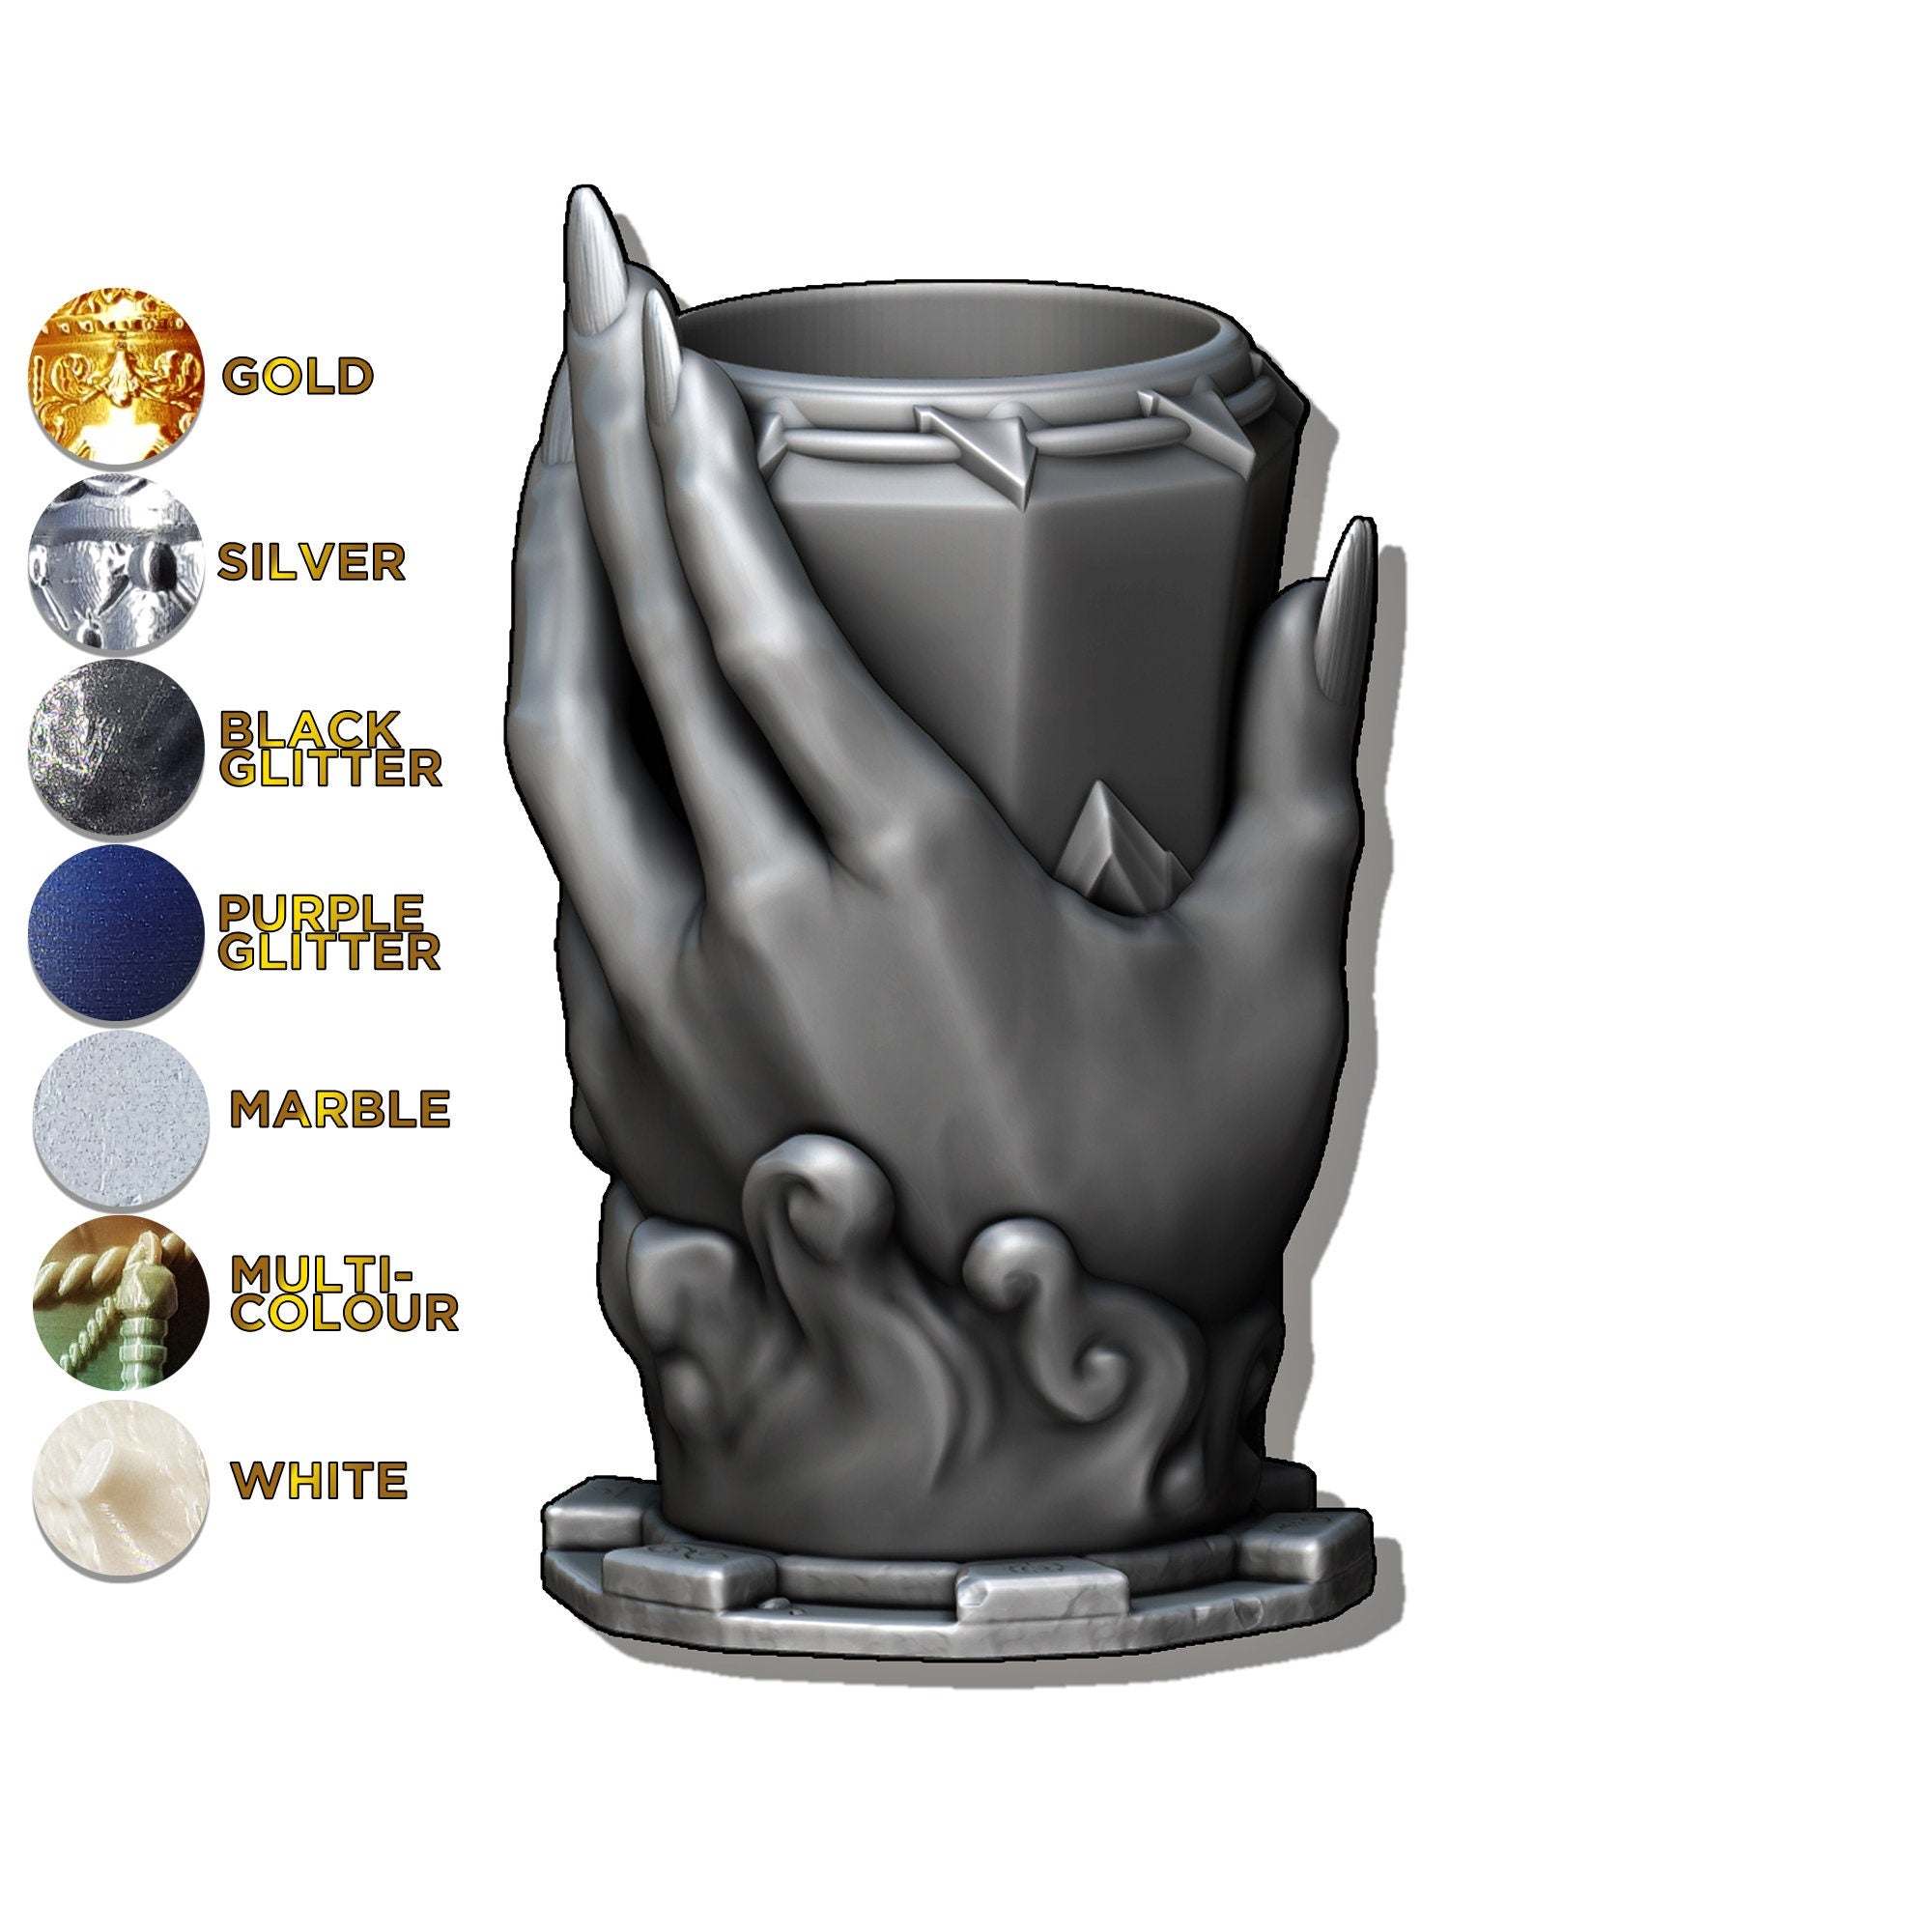 The SORCERER | Mythic Mug | Larp | Gaming Zubehör | Tabletop | Dice Cup | Box | Holder | Dungeons and Dragons | DnD | RPG | Fantasy-Role Playing Games